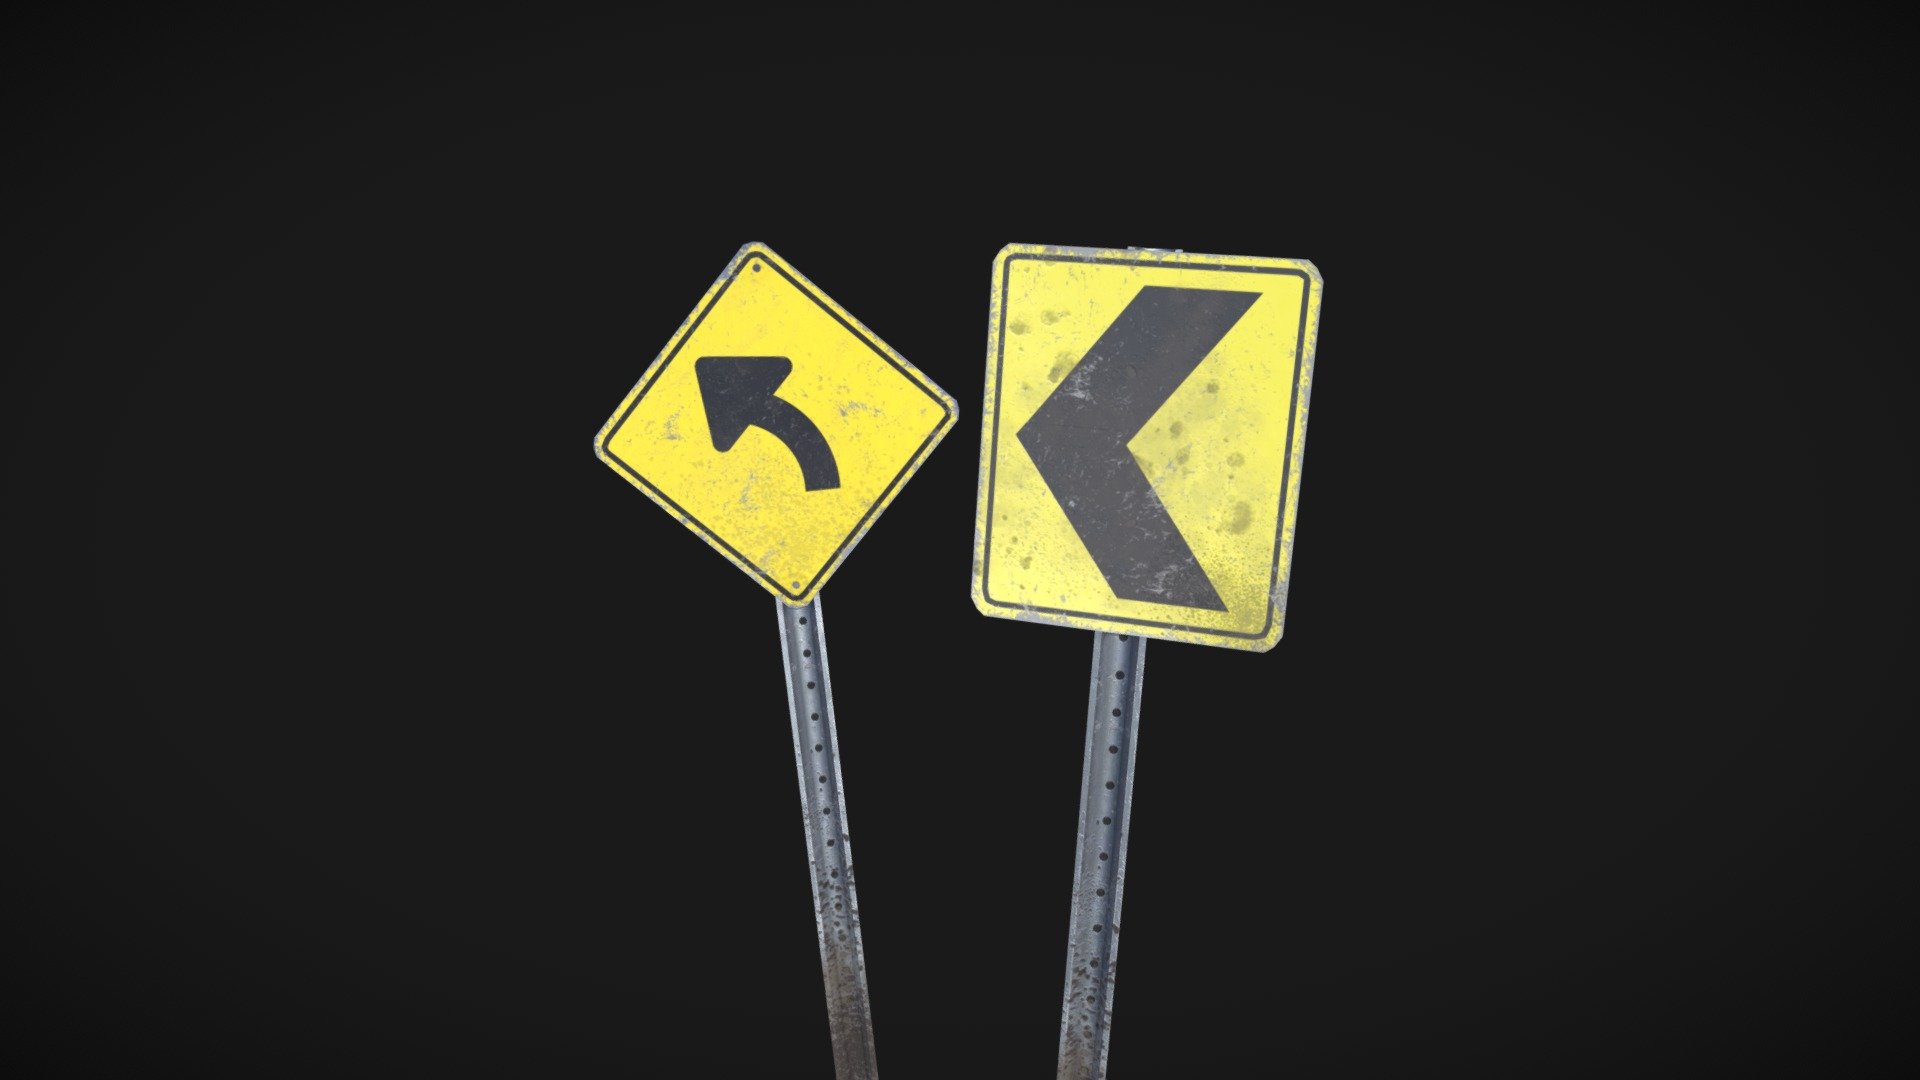 Just some standard street signs to let you know a left turn is coming up.
They look like they have been around for a while 3d model